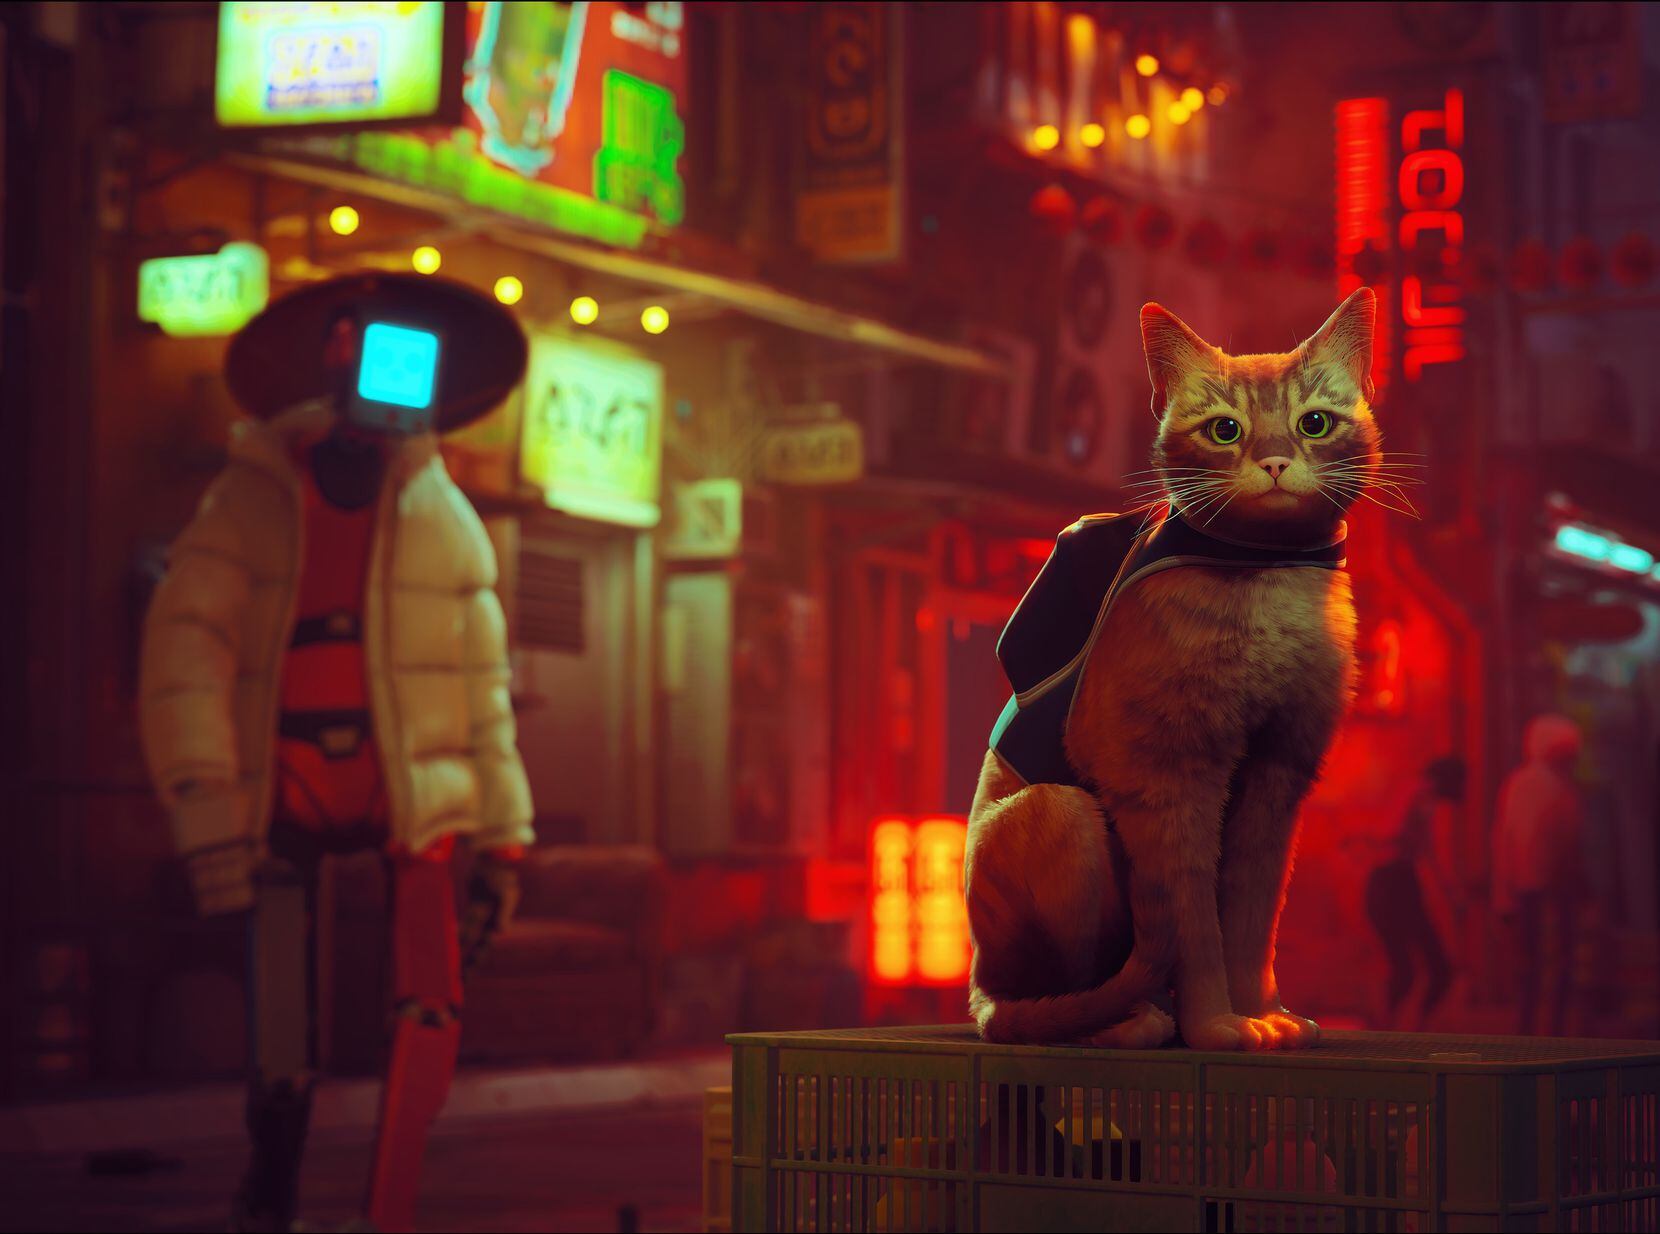 In "Stray," players take on the role of a cat, which has to escape an underground facility...